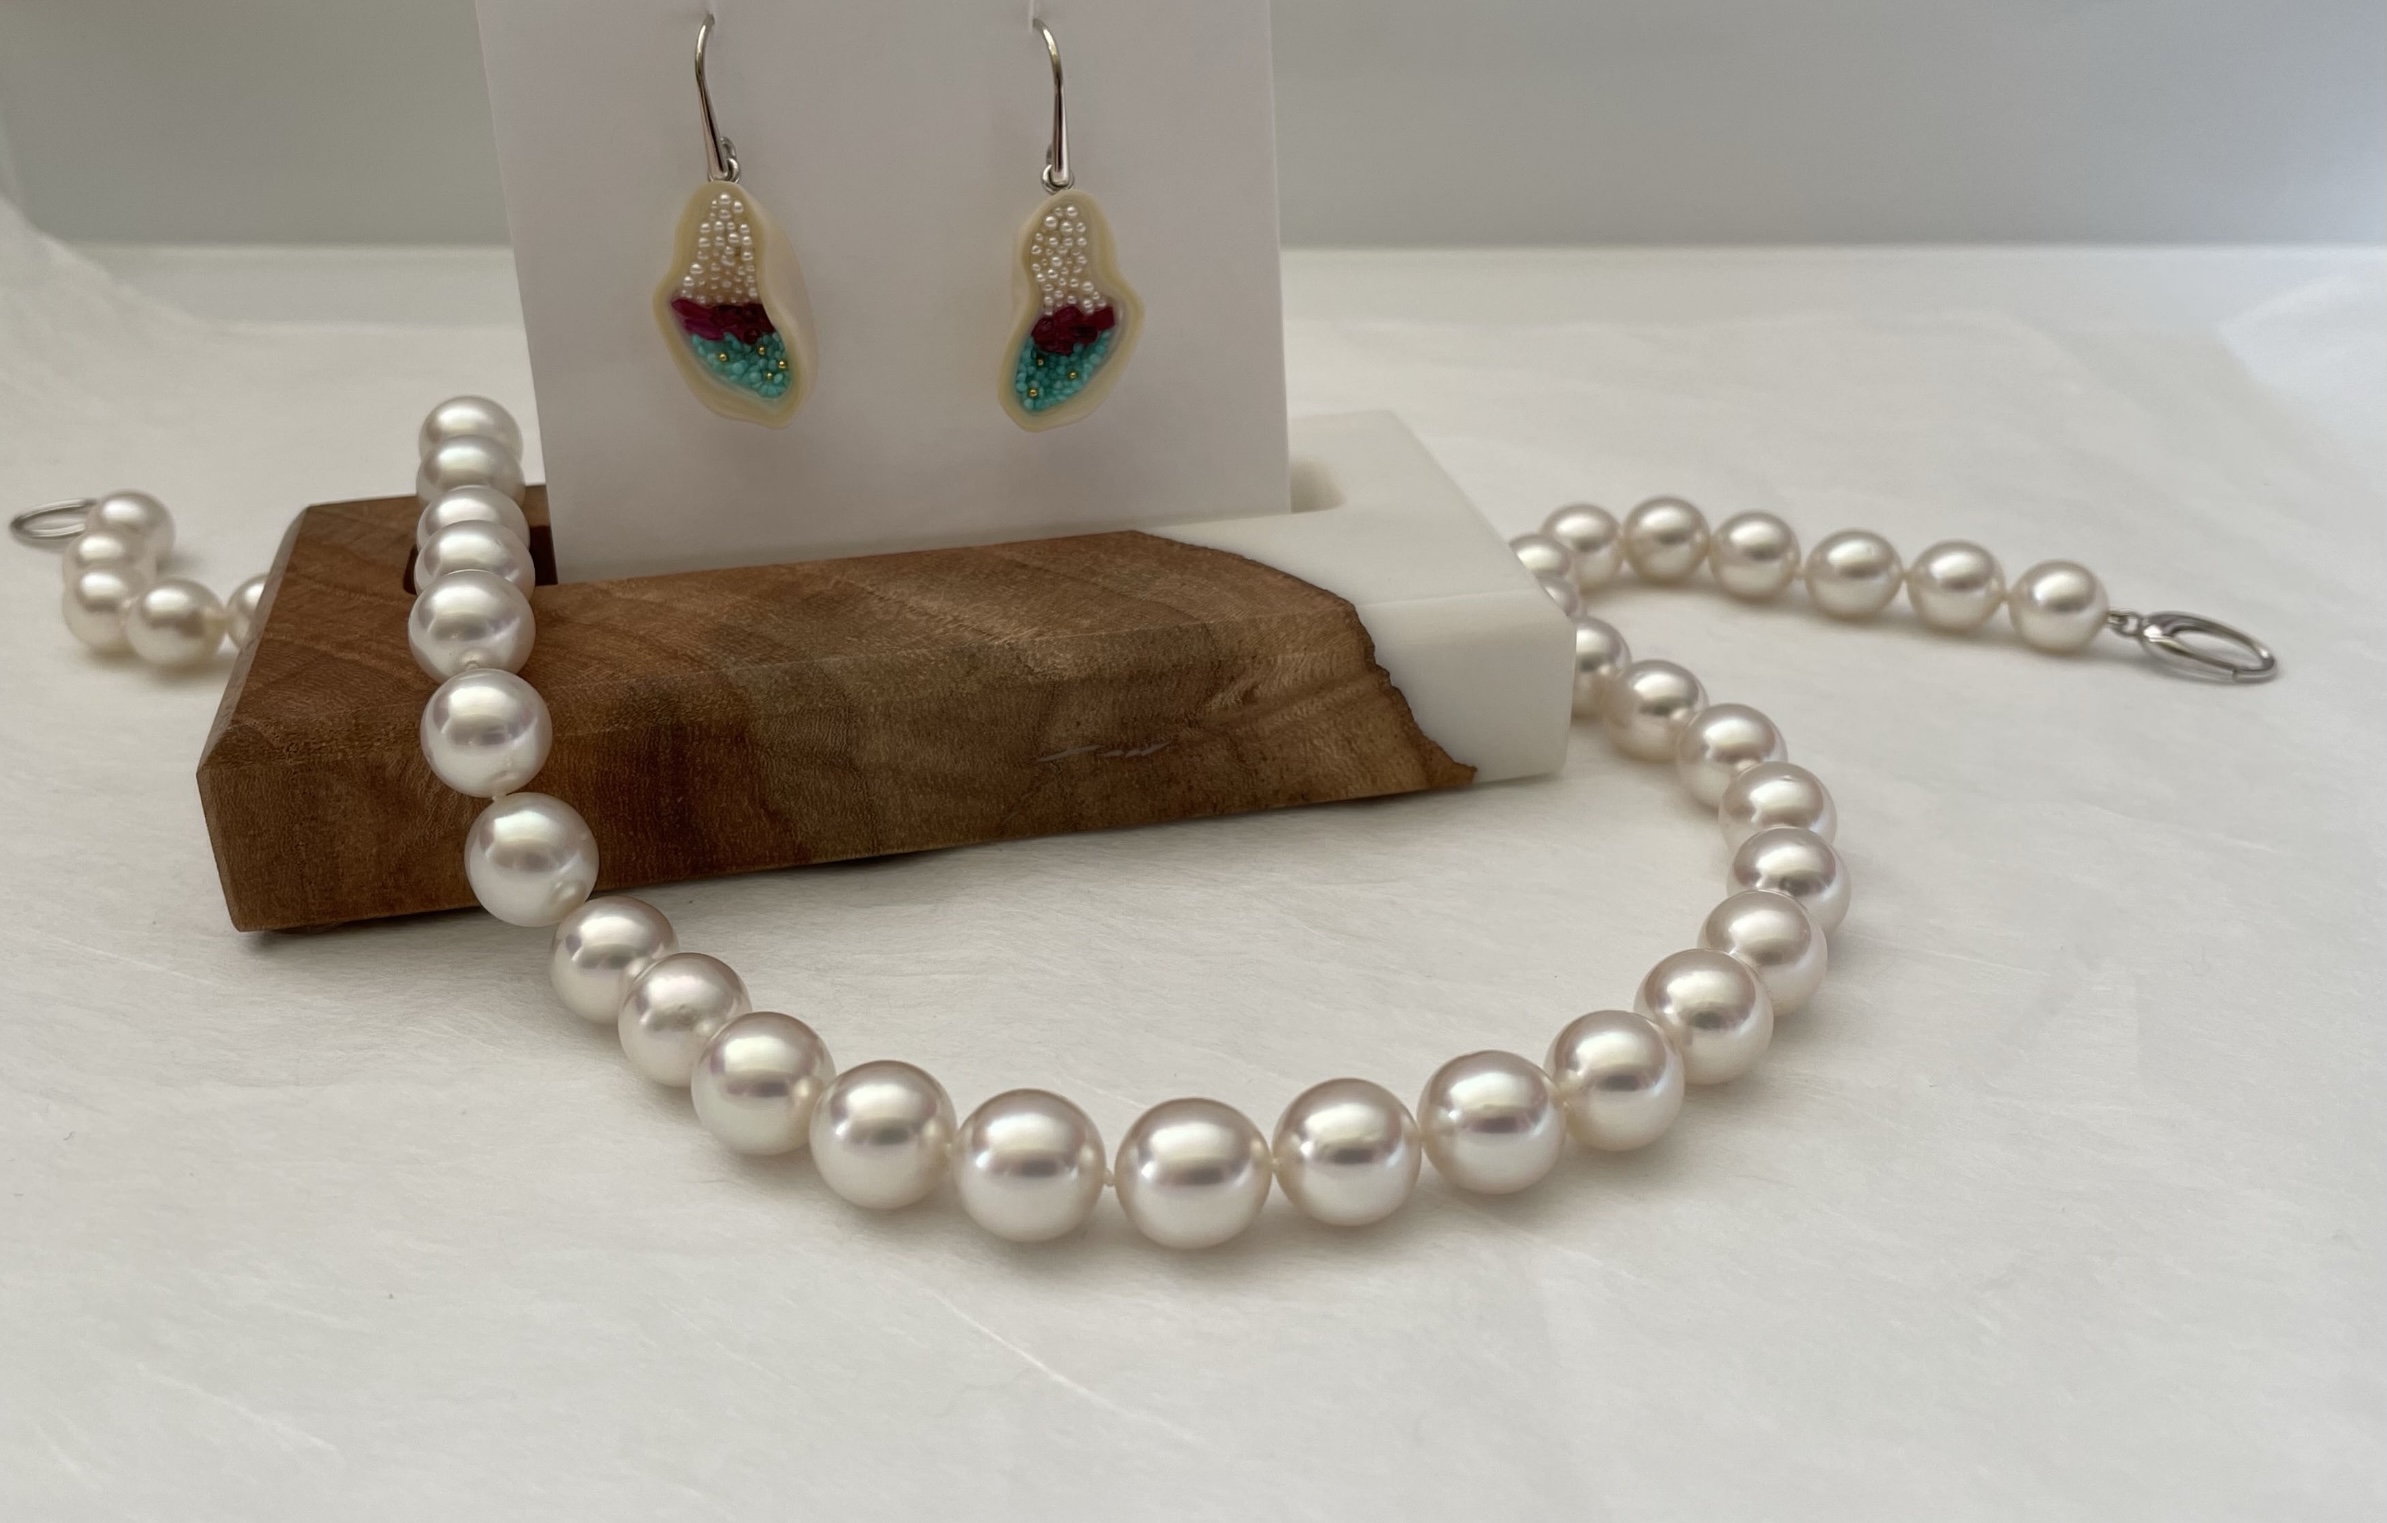 Little h earrings and SS Paspaley pearls from Cees